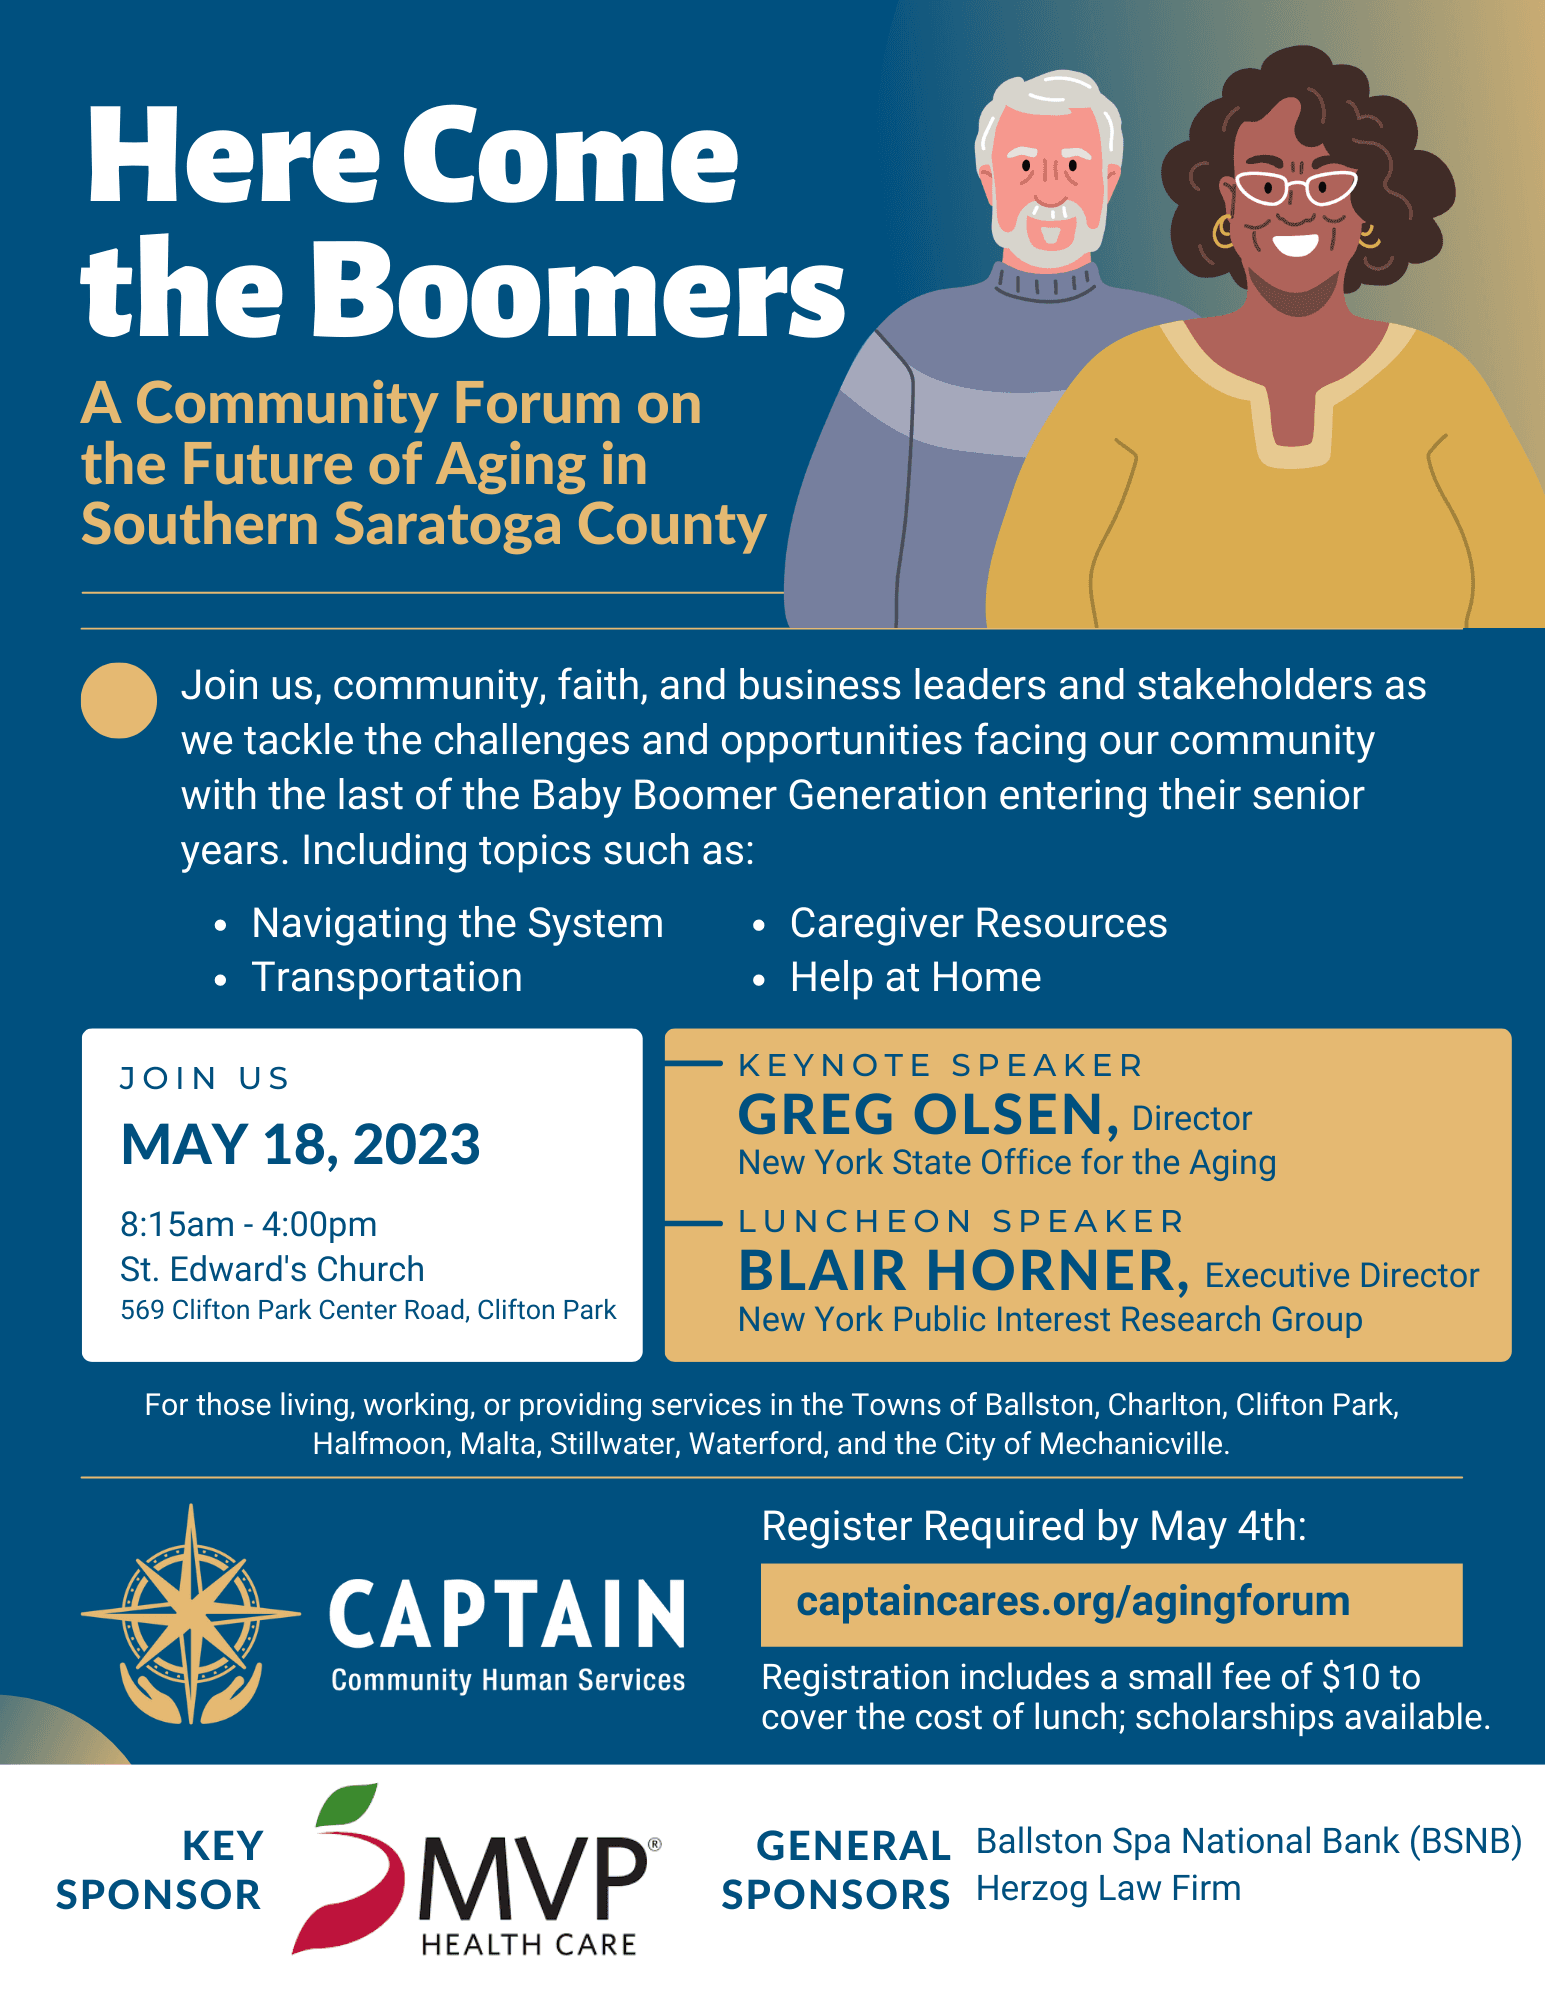 Registration Open! Here Come the Boomers: A Community Forum on the Future of Aging in Southern Saratoga County